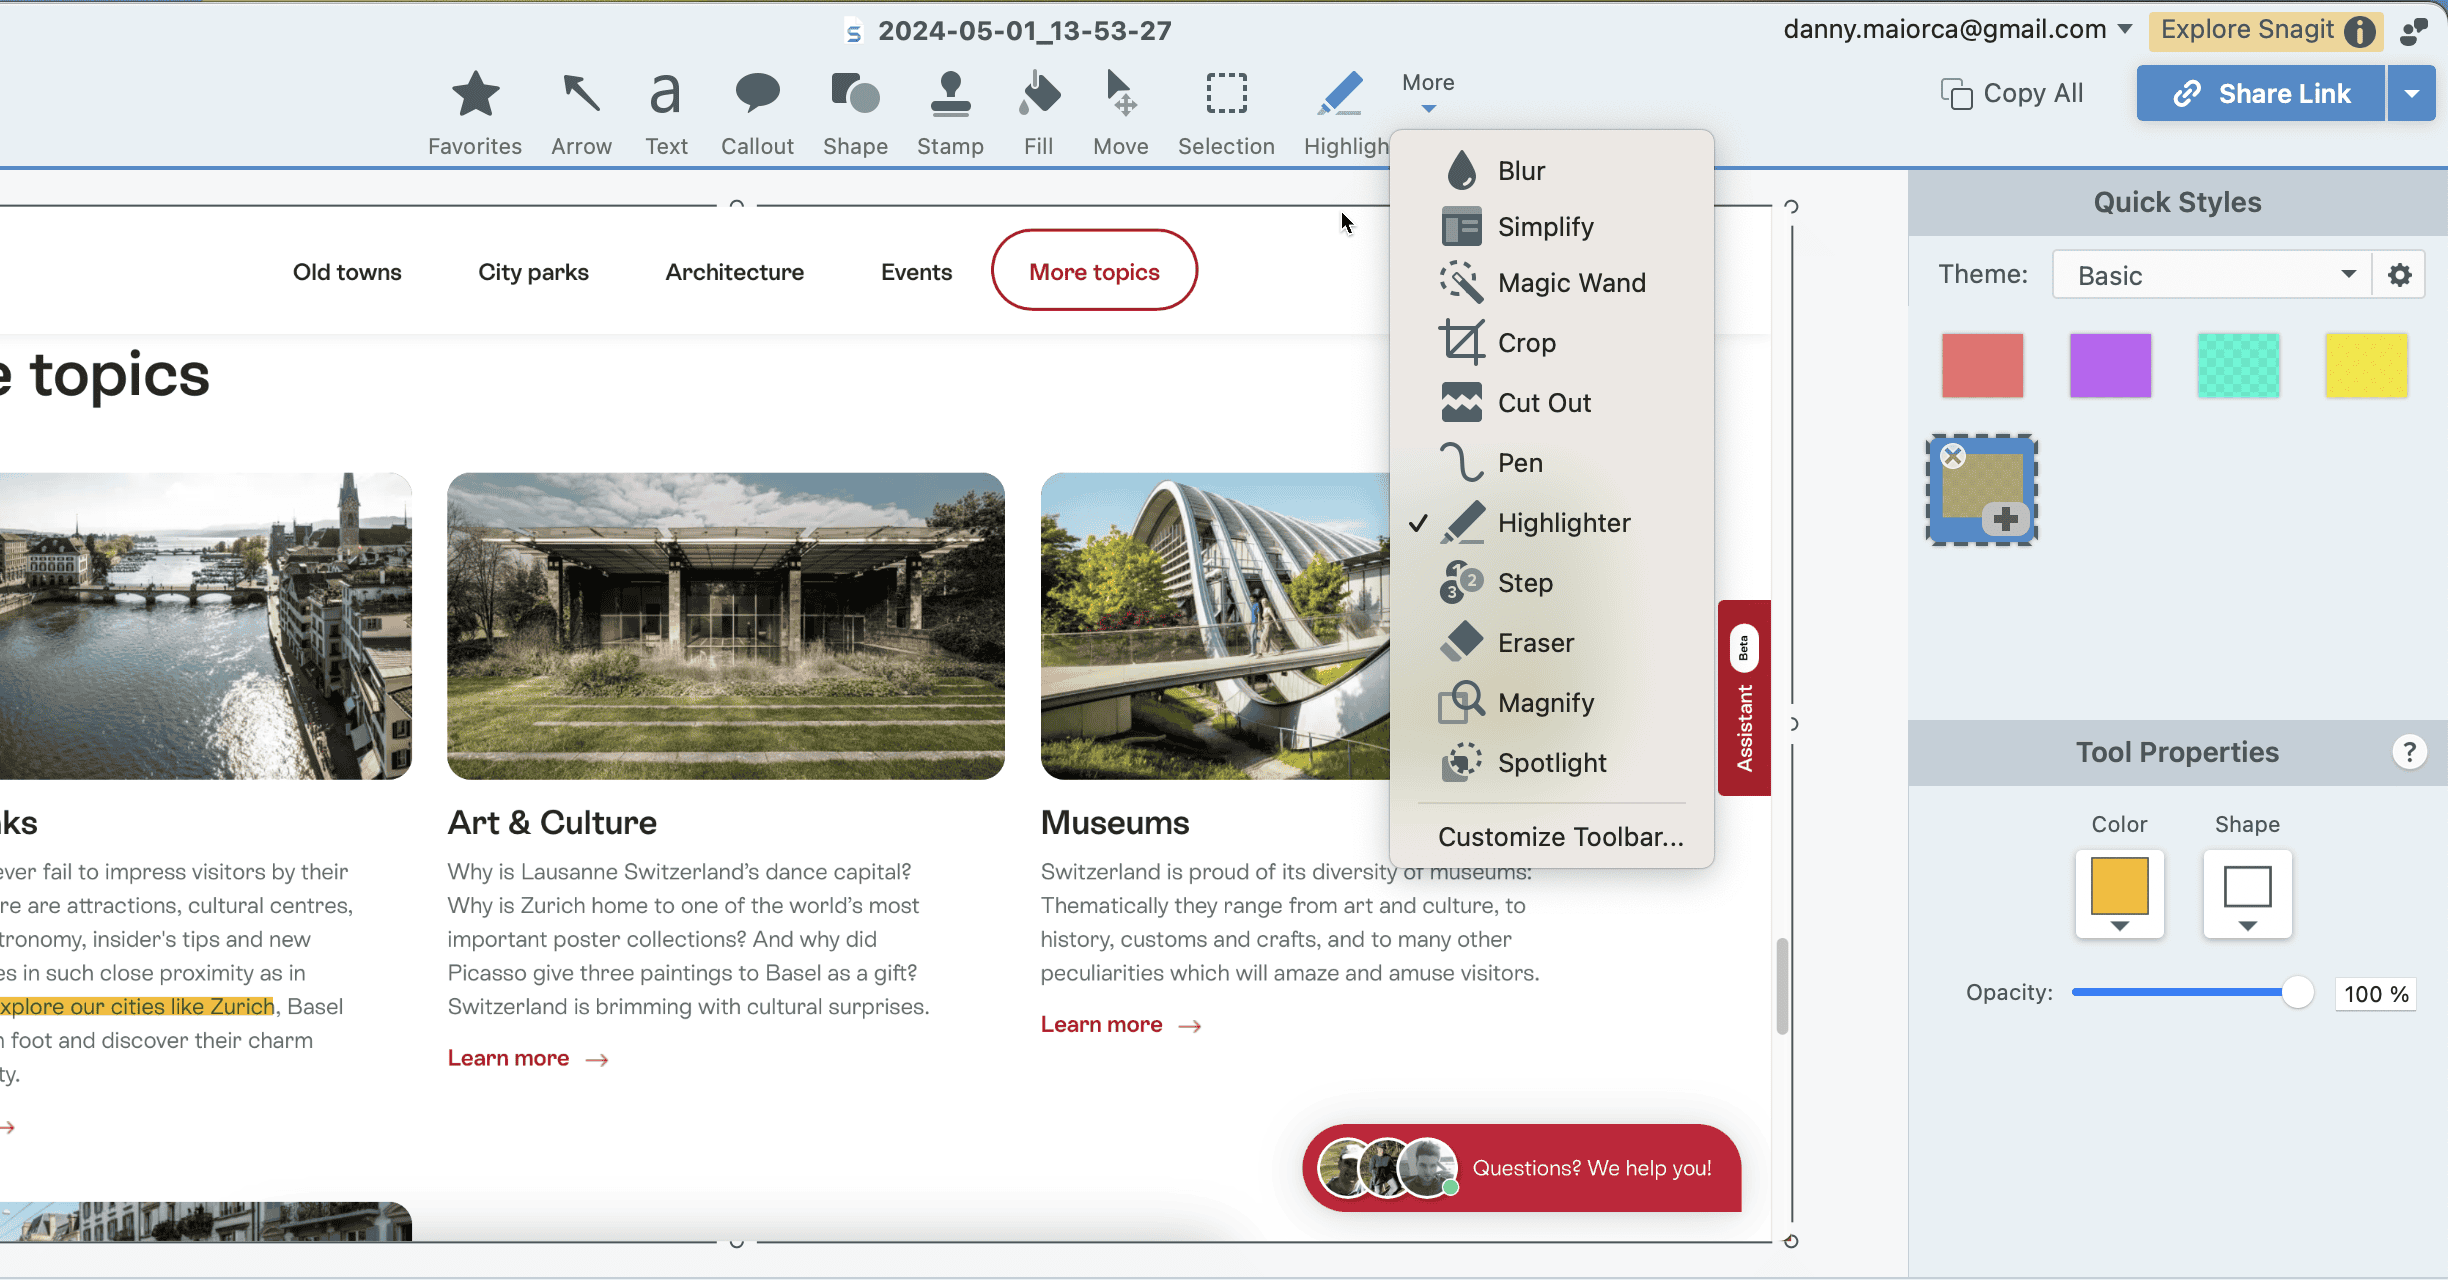 the additional editing features available in snagit